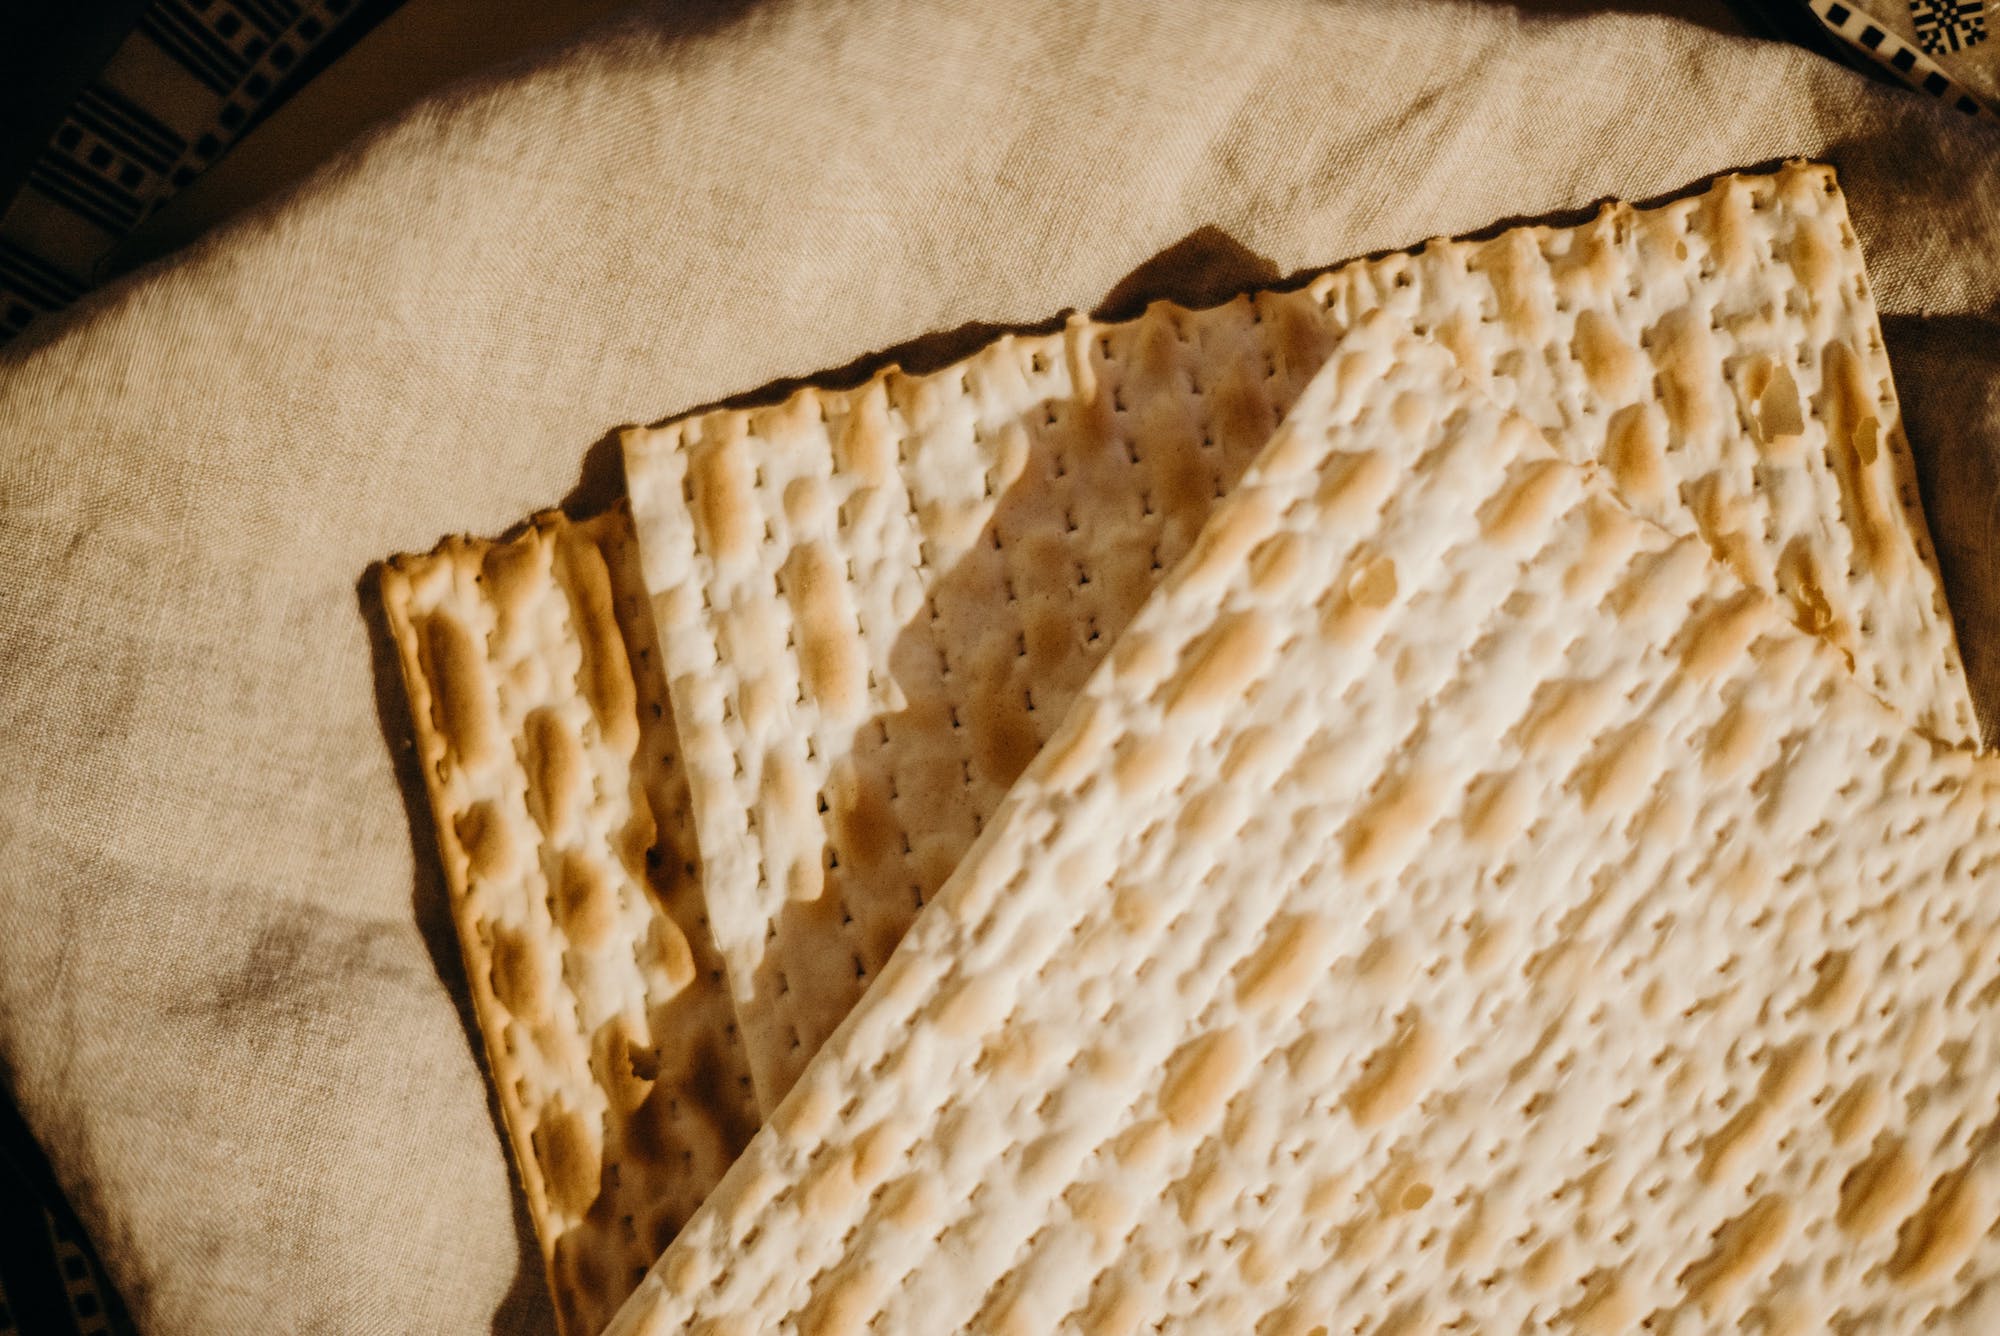 How to celebrate passover as a Christian